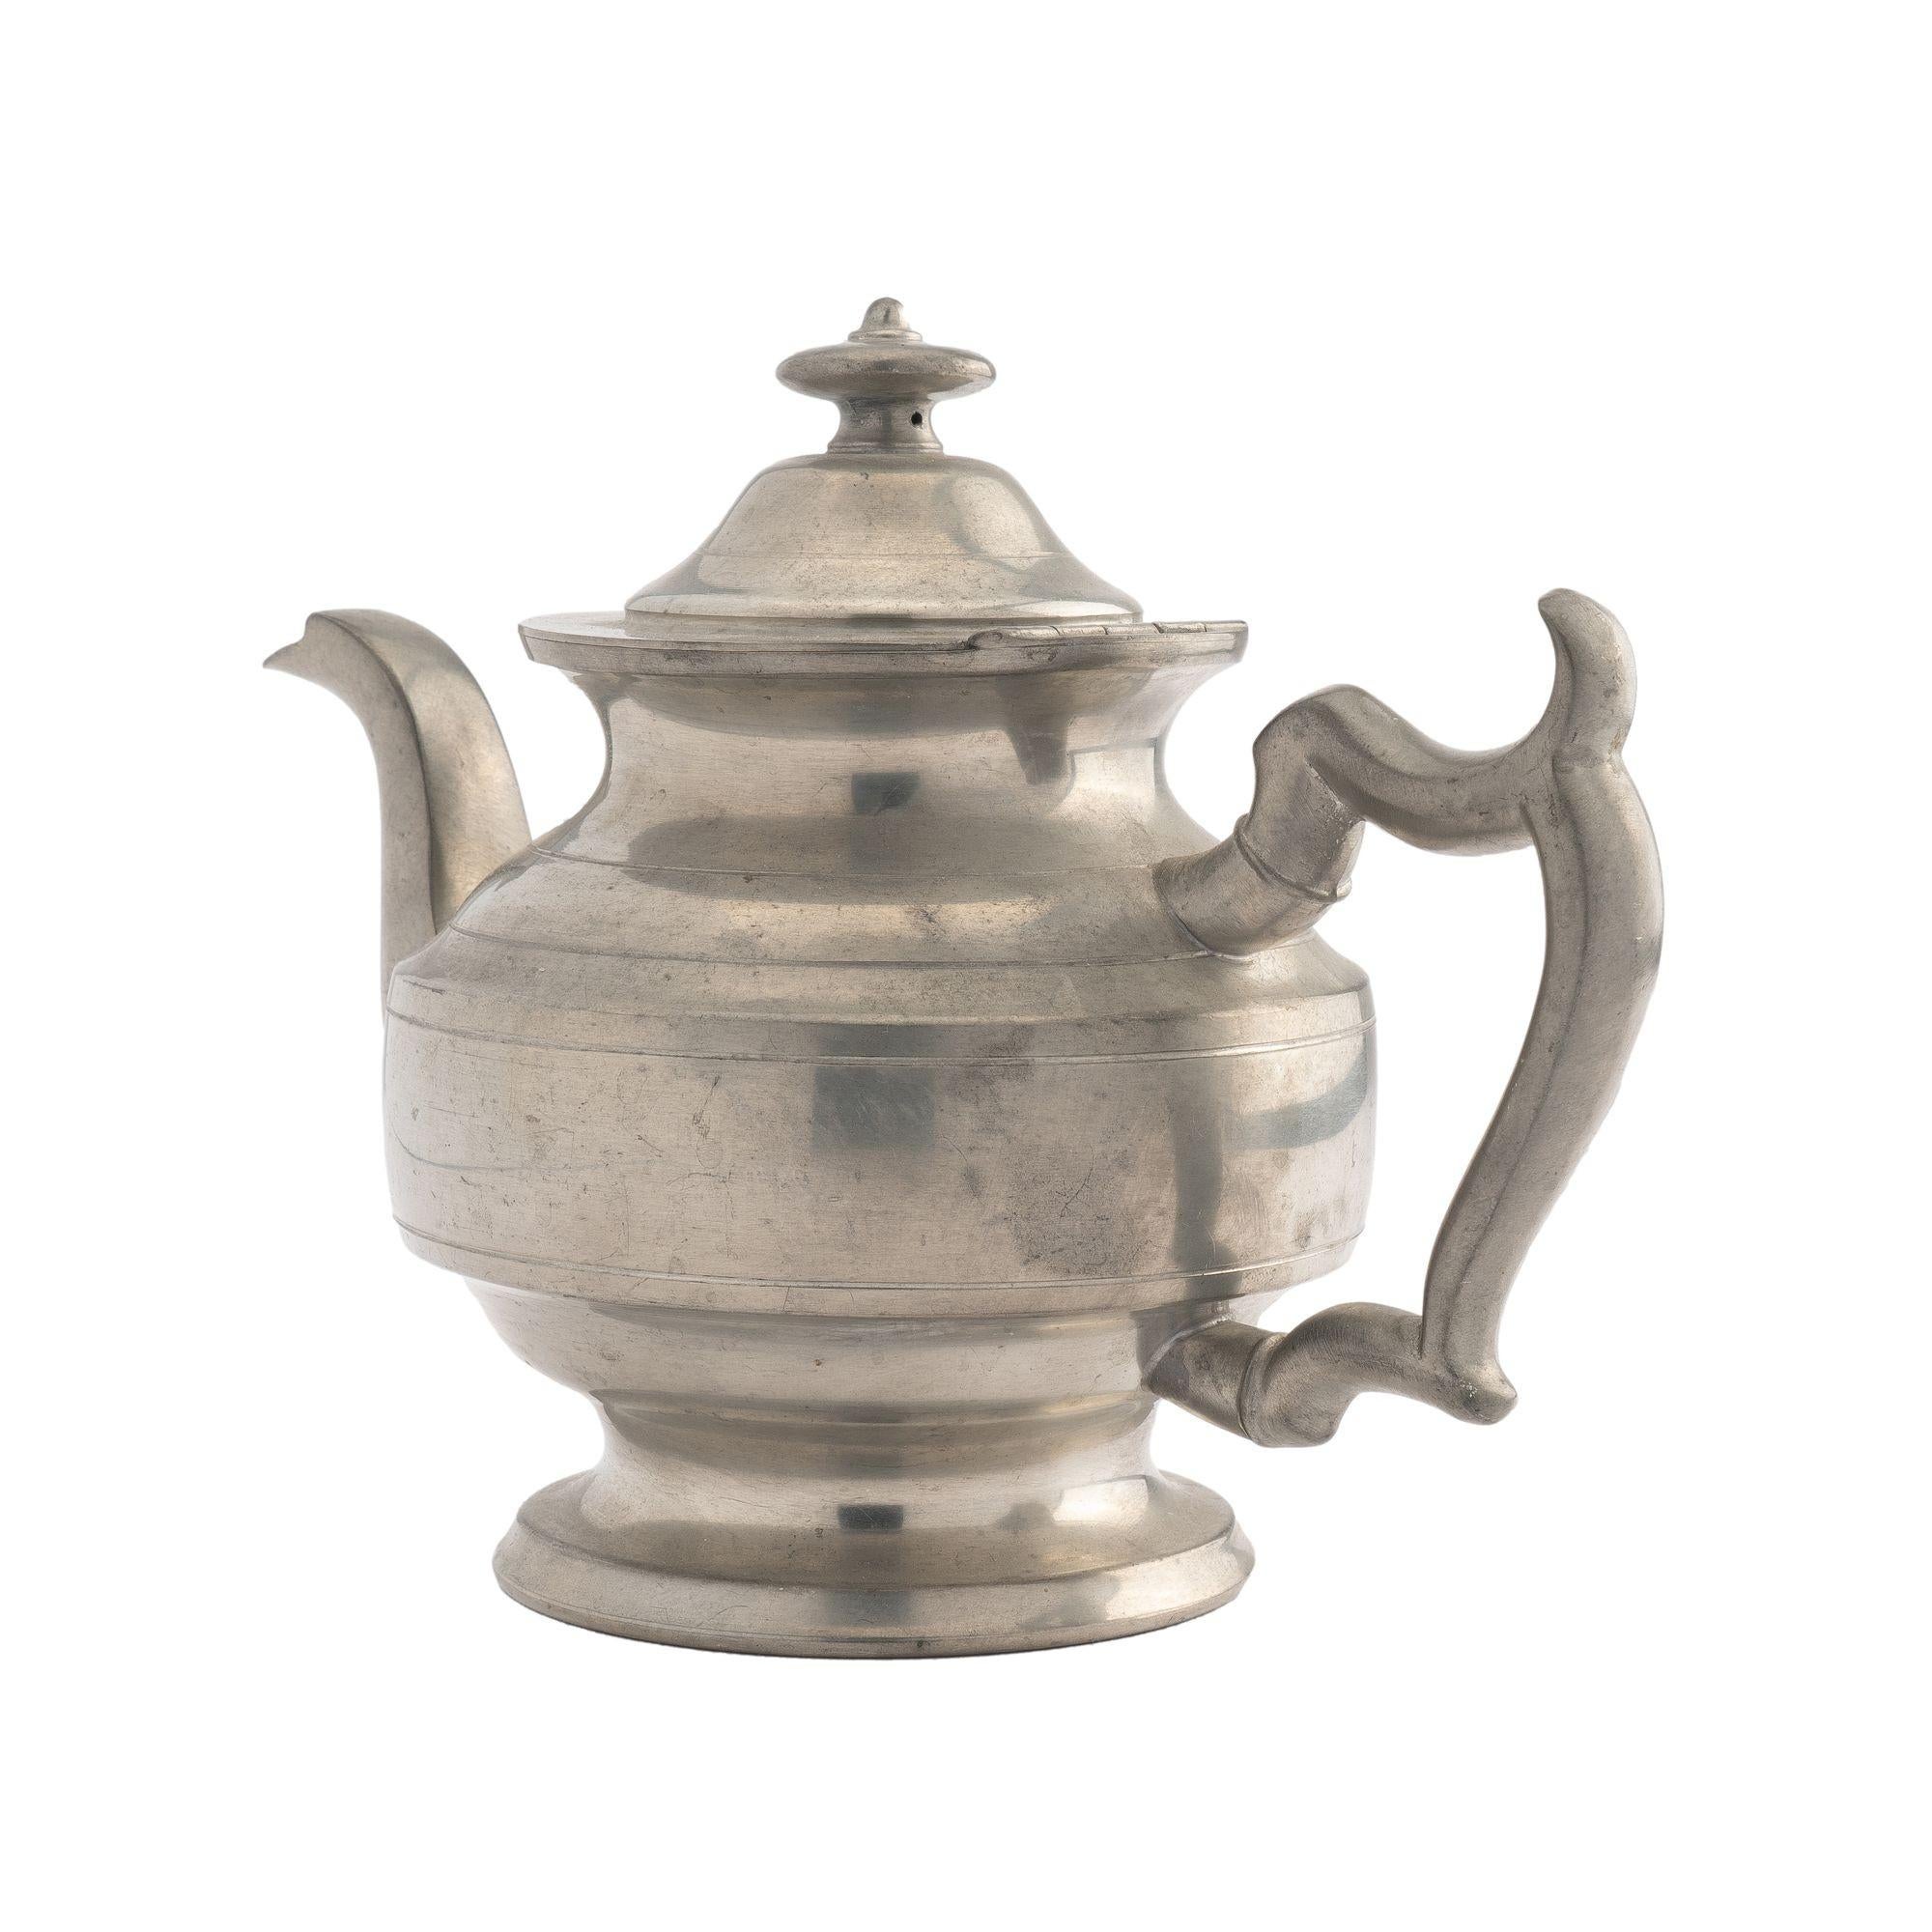 Woodbury Pewter Academic Revival Pewter Holloware Teapot, 1952 For Sale 3